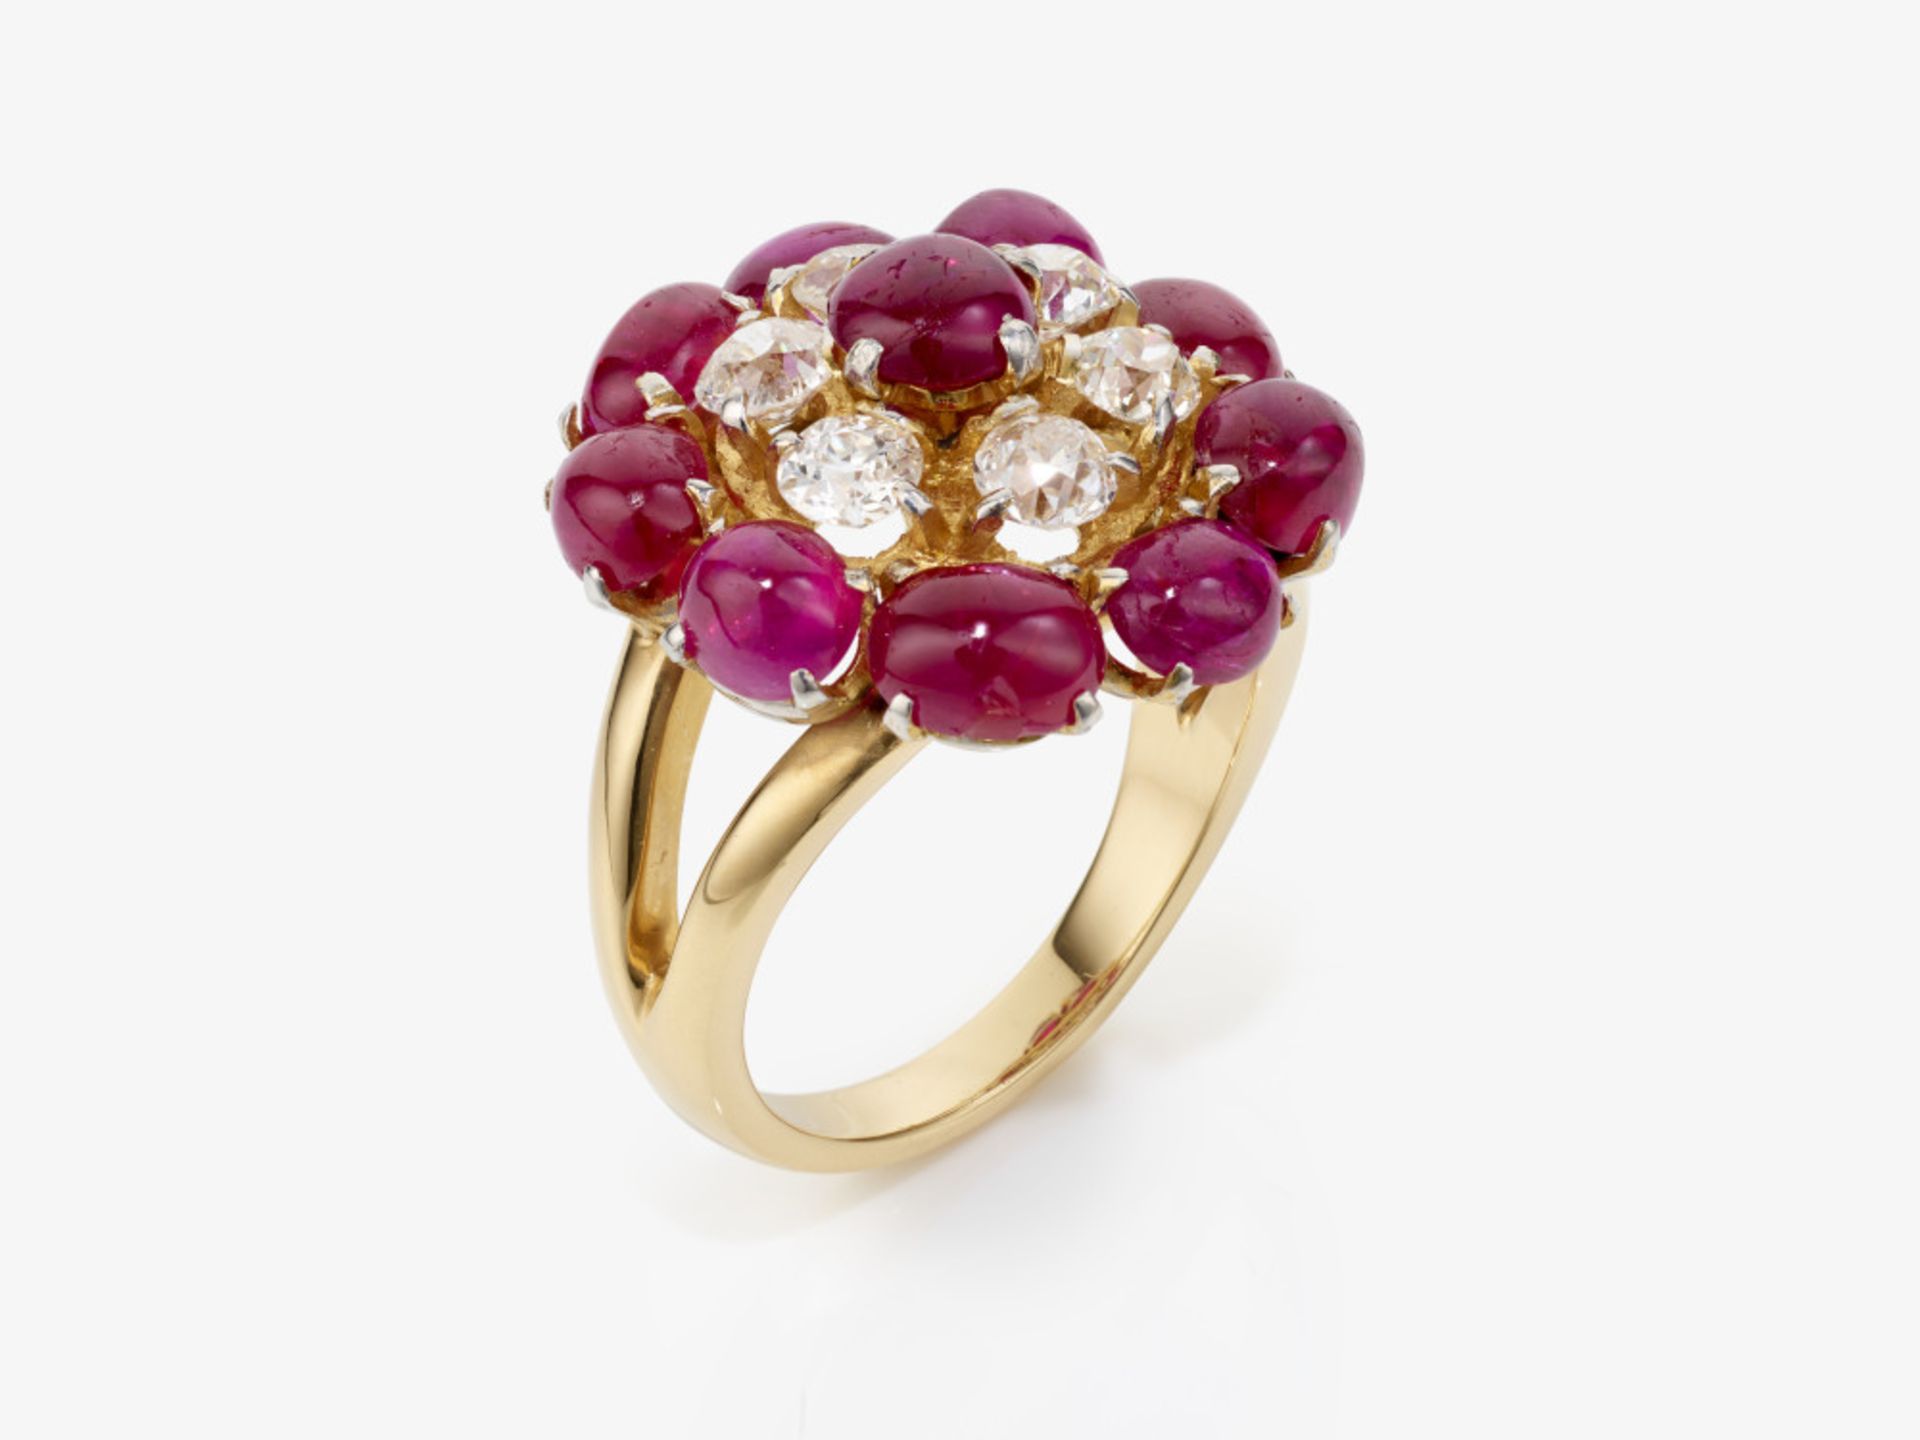 A cocktail ring decorated with fine rubies and old-cut diamonds